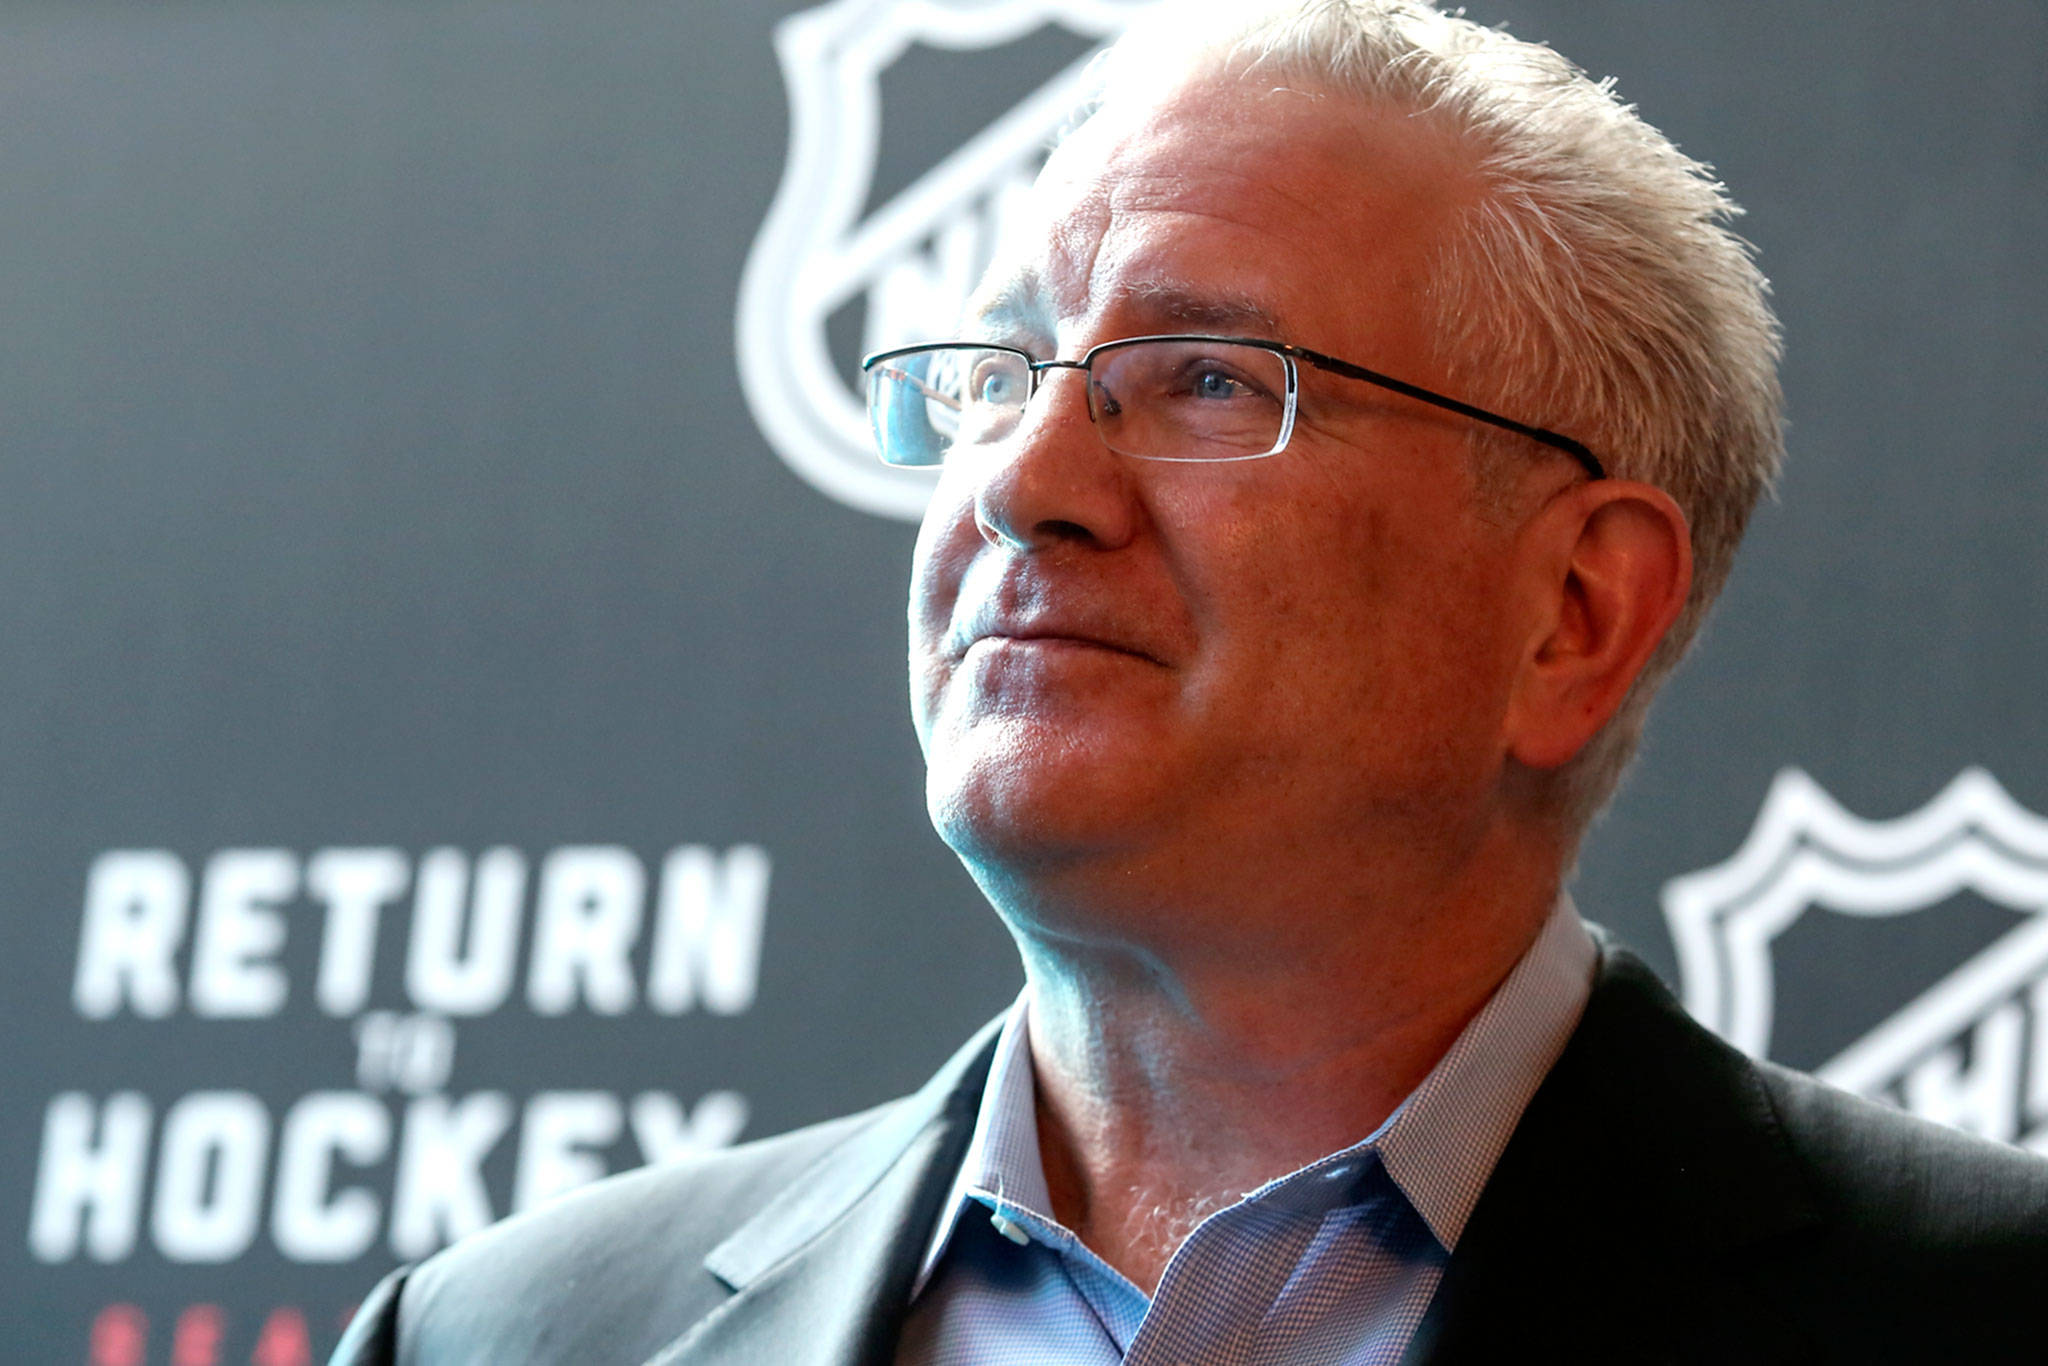 NHL Seattle president and CEO Tod Leiweke fields questions during media day on April 18, 2019, in Seattle. (Kevin Clark / The Herald)